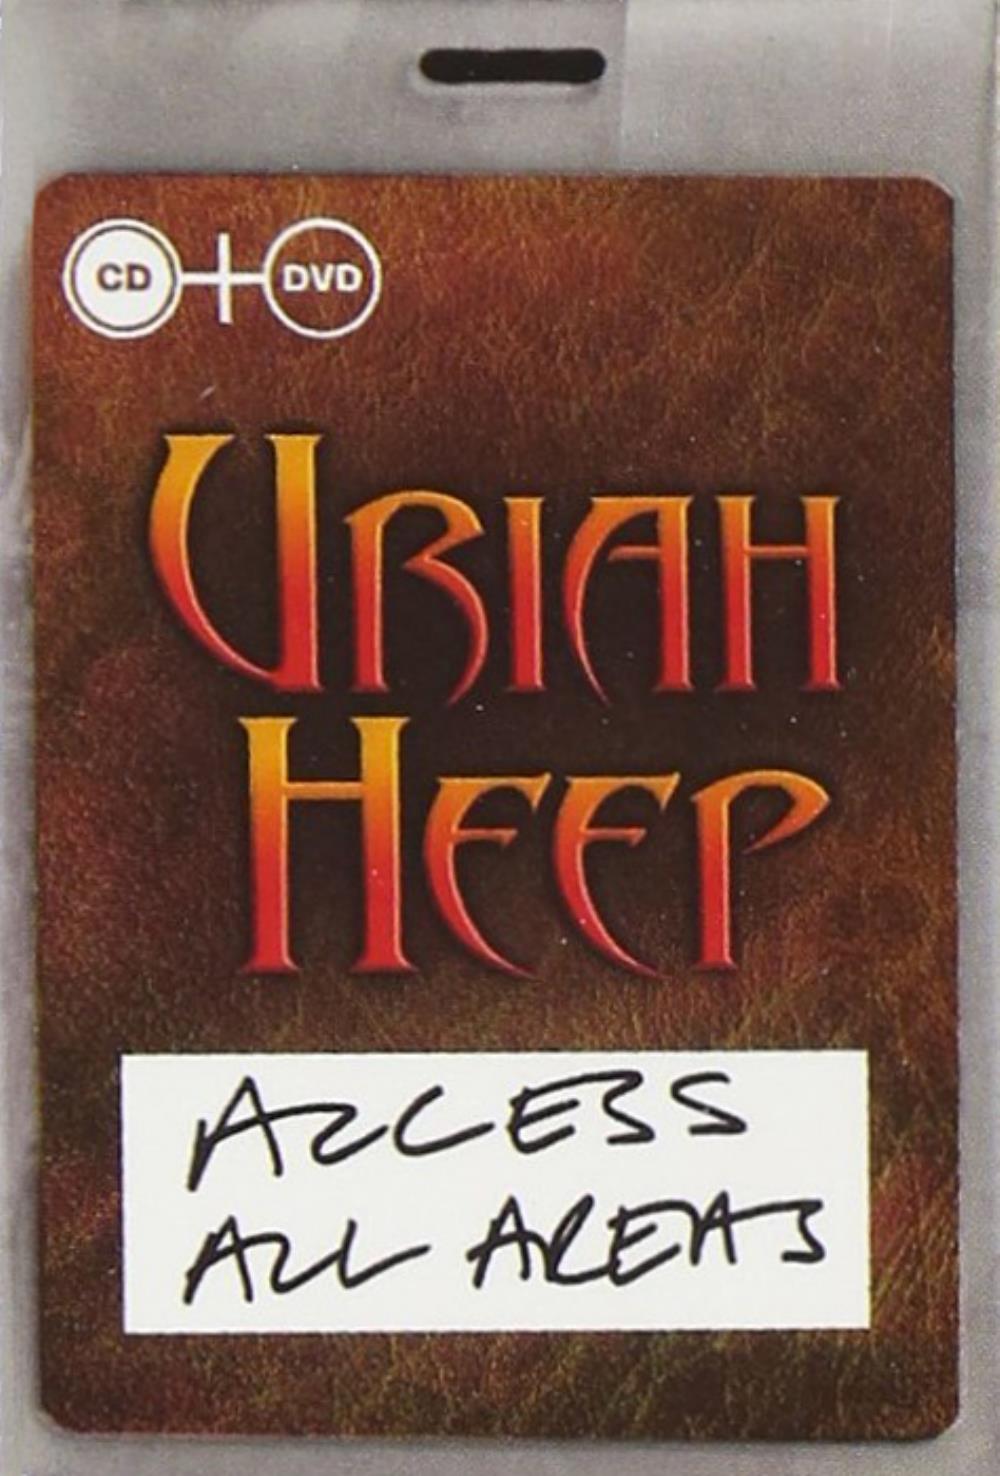 Uriah Heep Access All Areas (20th Anniversary Concert) album cover